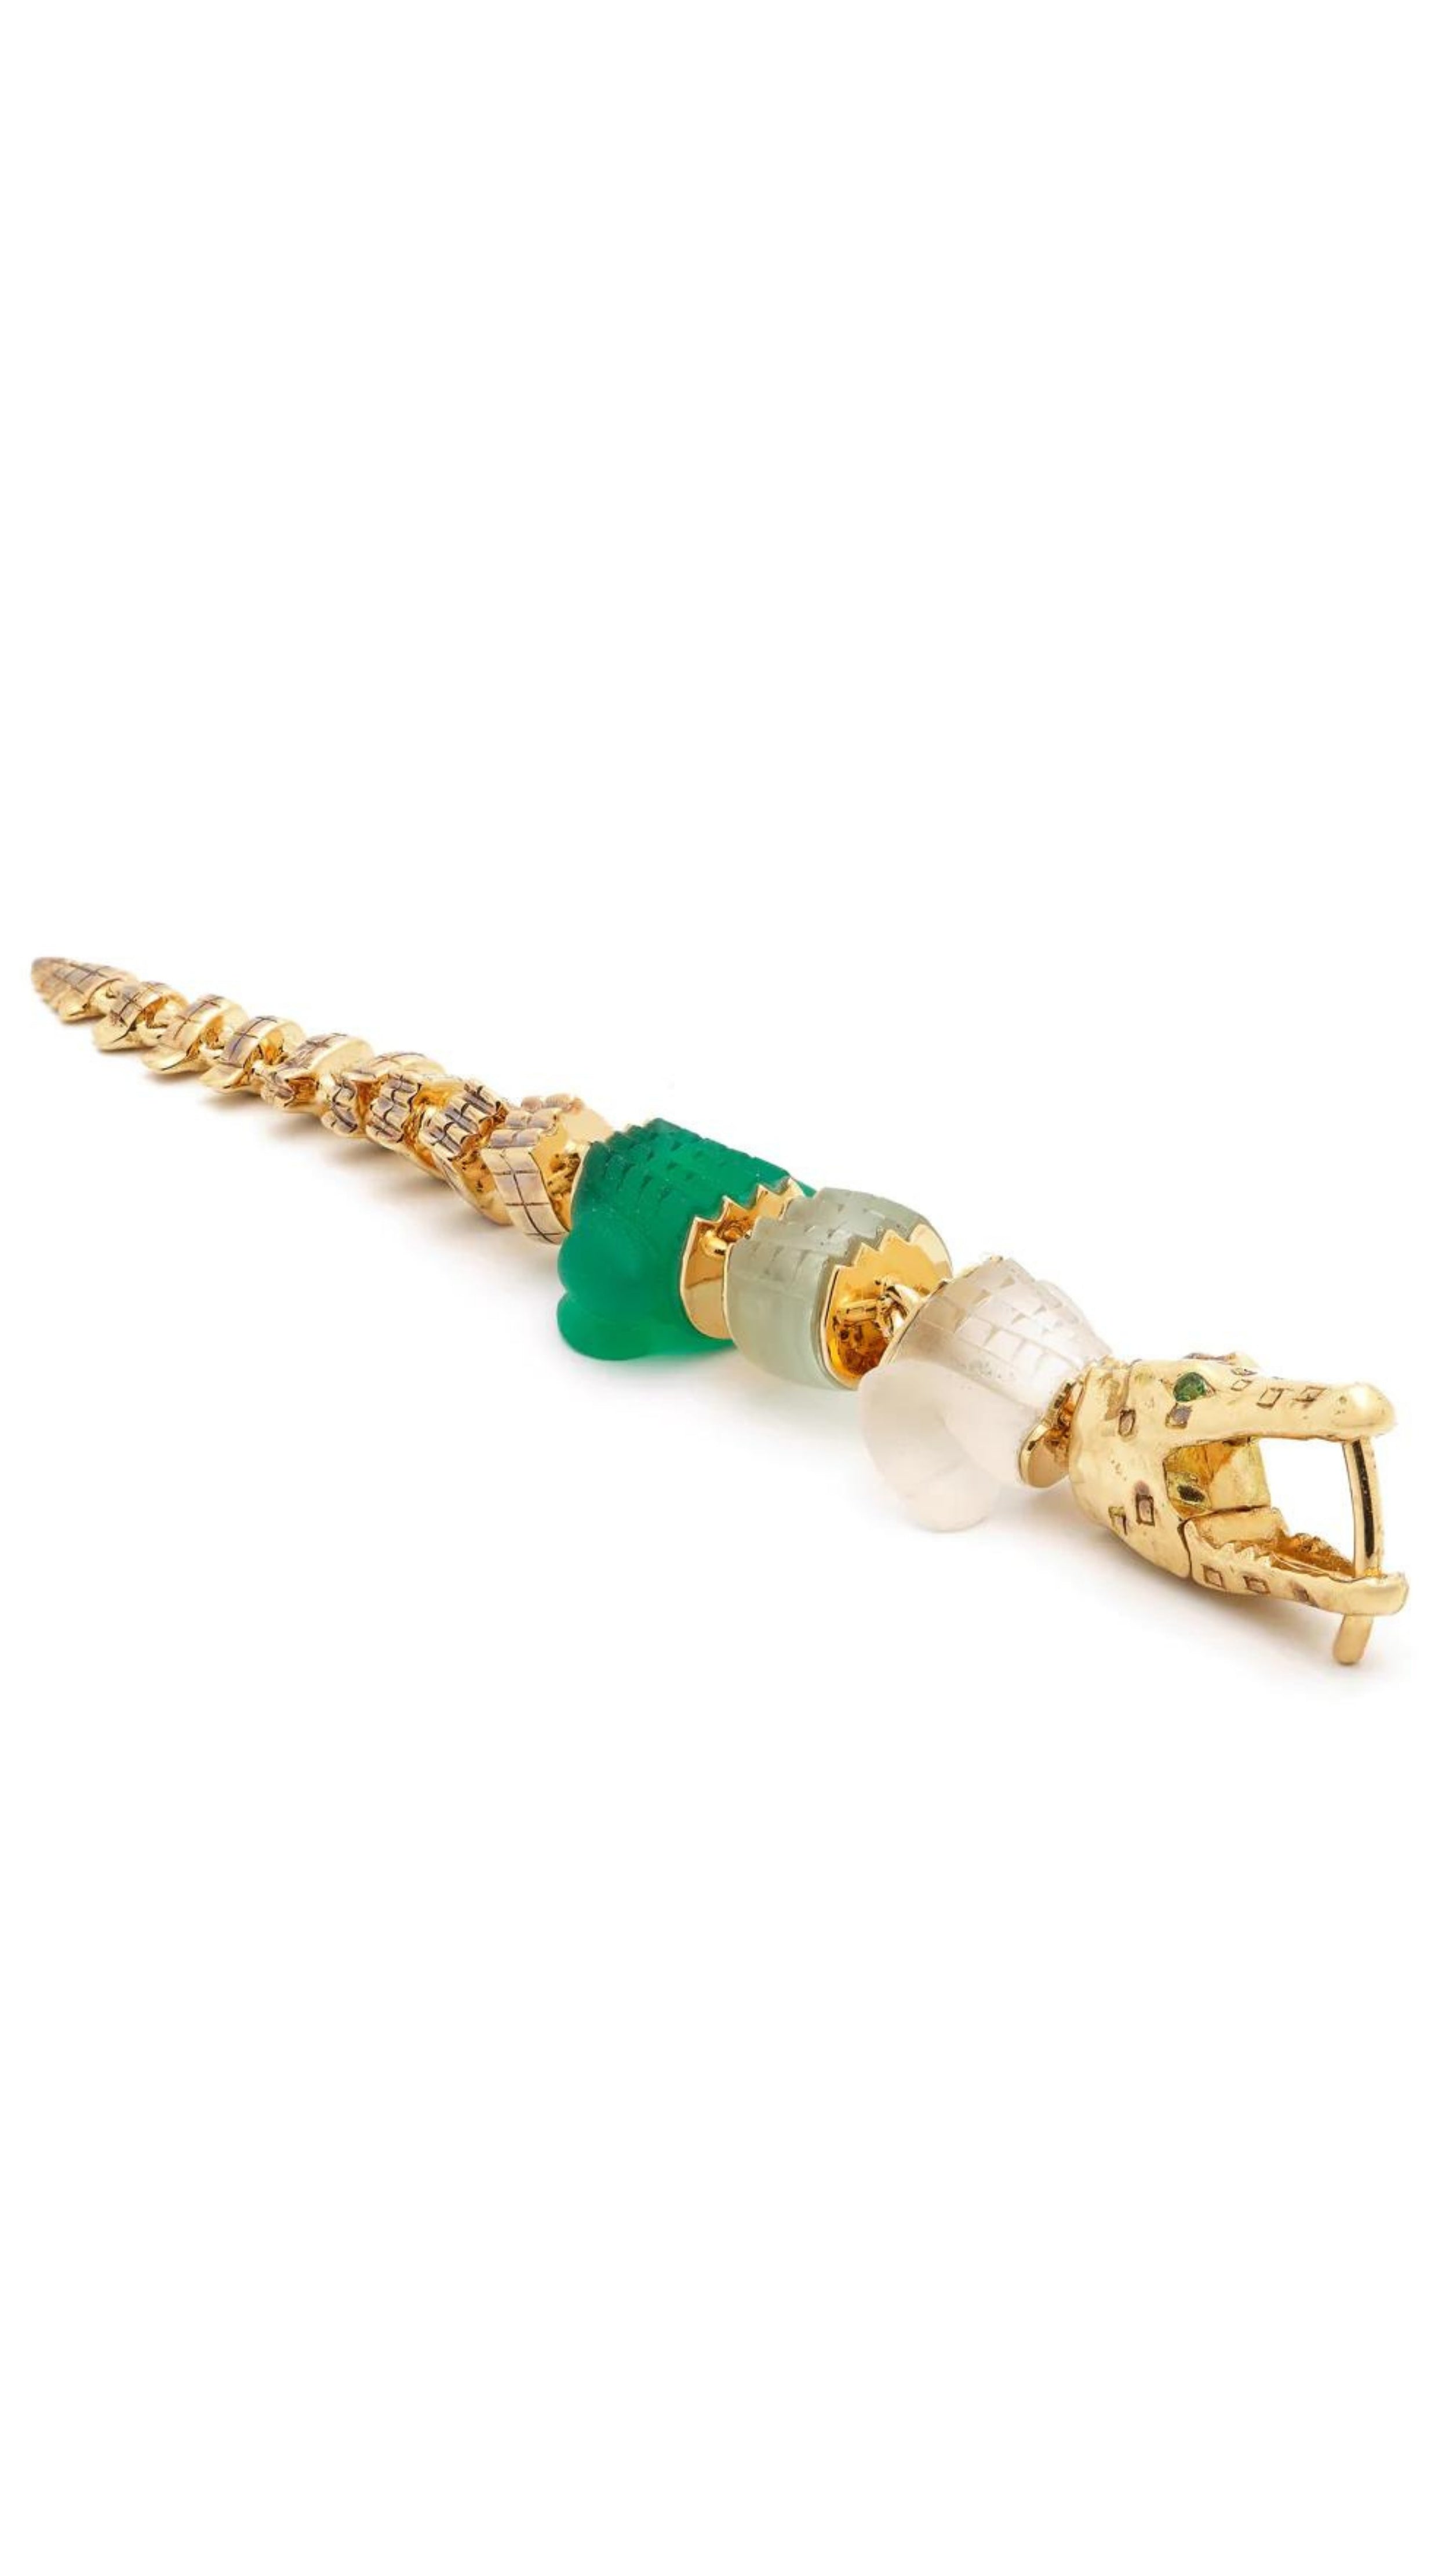 Bibi van der Velden Green Gradient Alligator Vertebrae Bite Earring. Crafted in 18K yellow gold, the alligator's body is formed by White Quartz, Green Amethyst, Green Agate while the head and tail are in solid 18K gold.  Photo shows earring laying down.